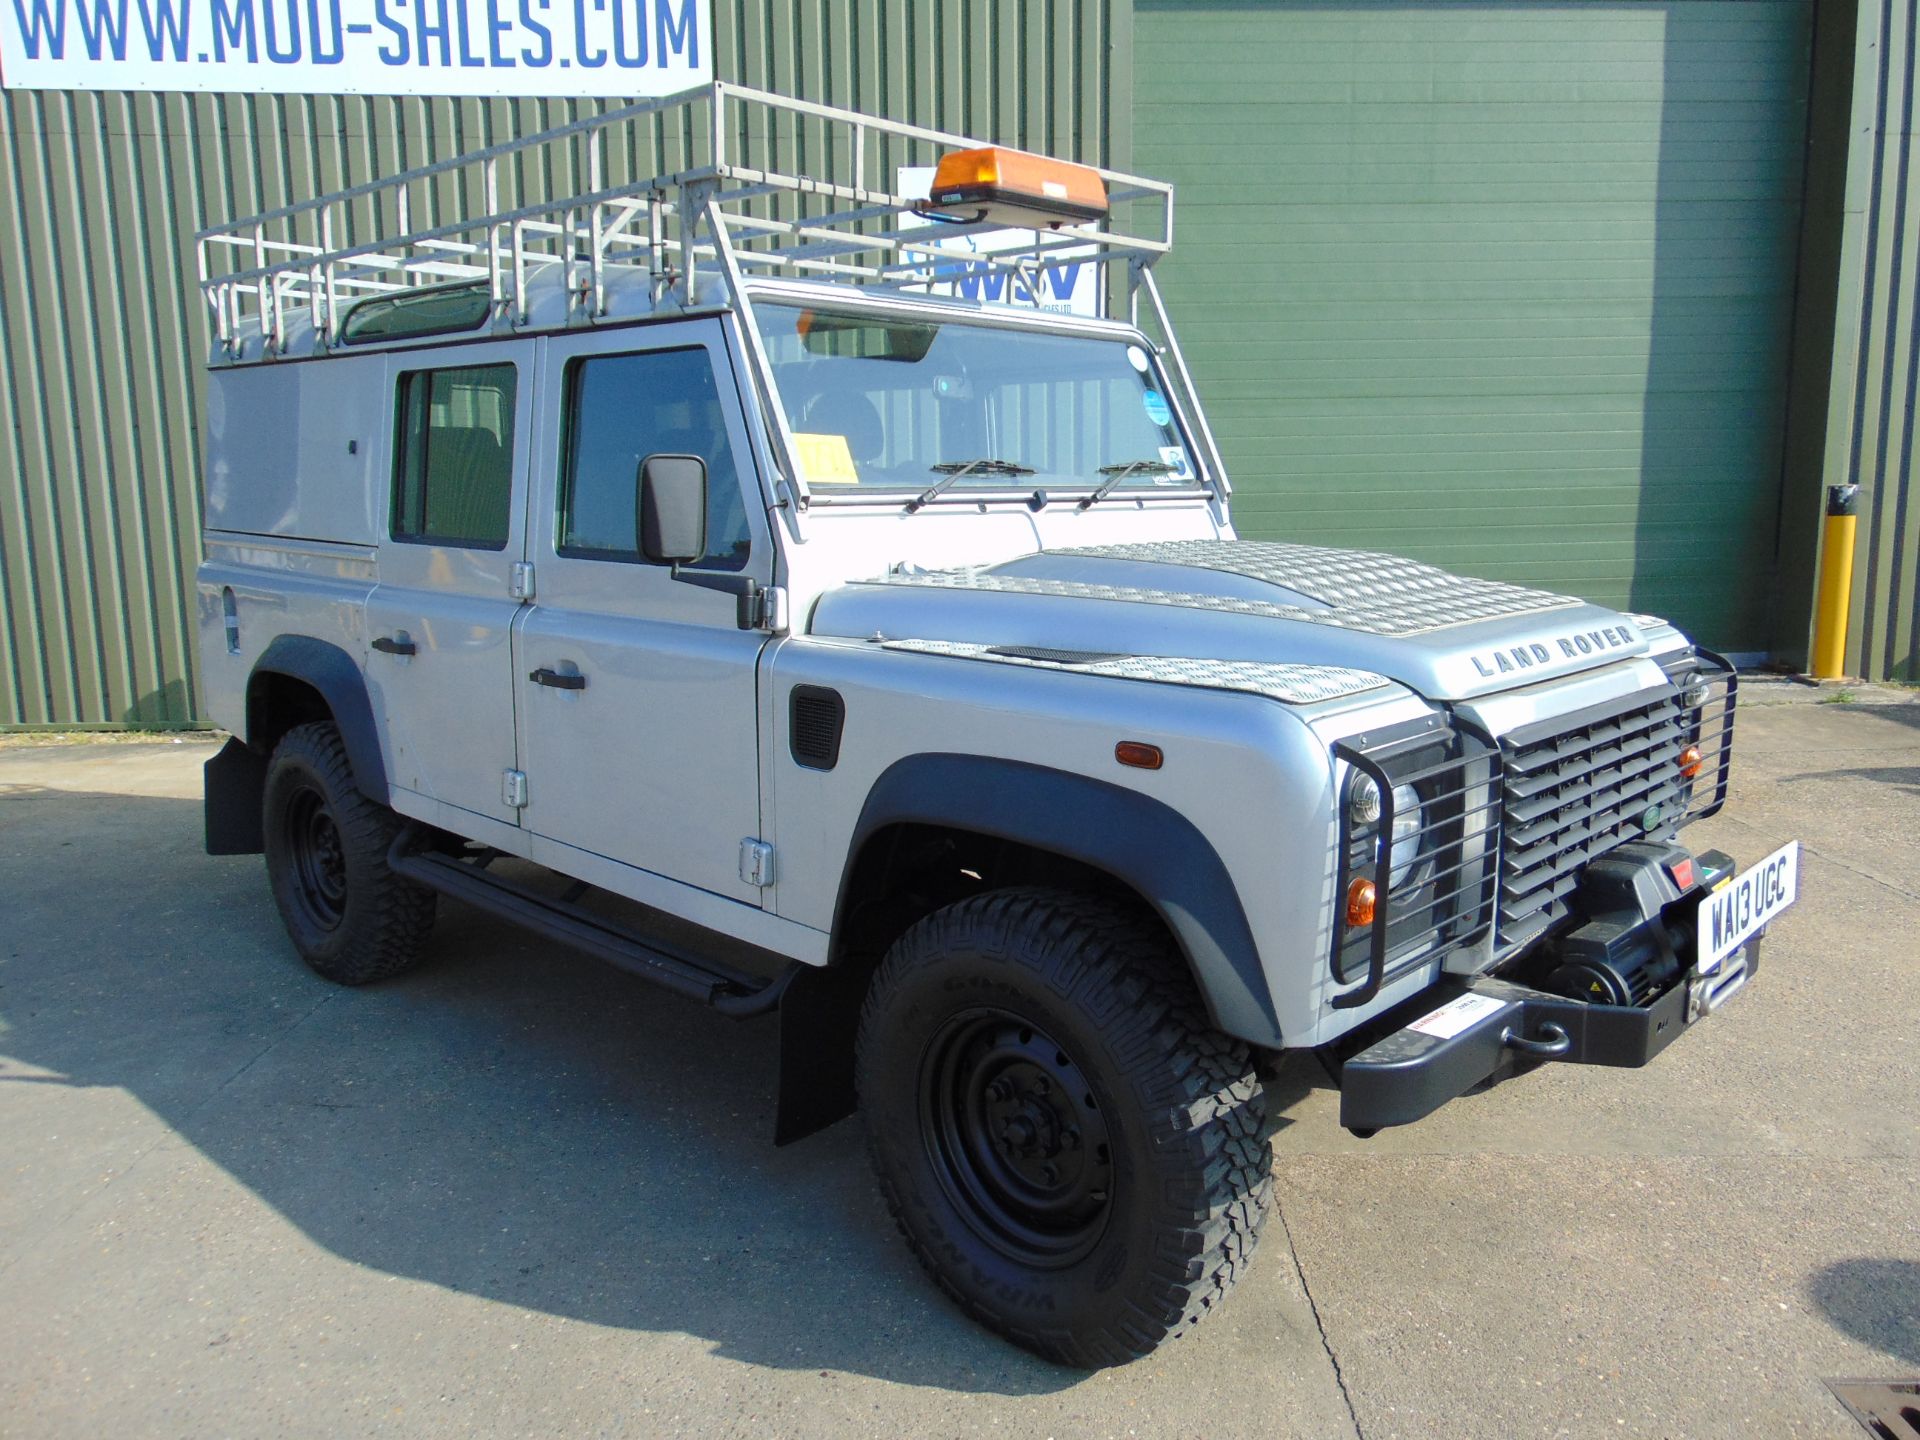 1 Owner 2013 Land Rover Defender 110 Utility 5 door 5 seater ONLY 83,117 MILES!